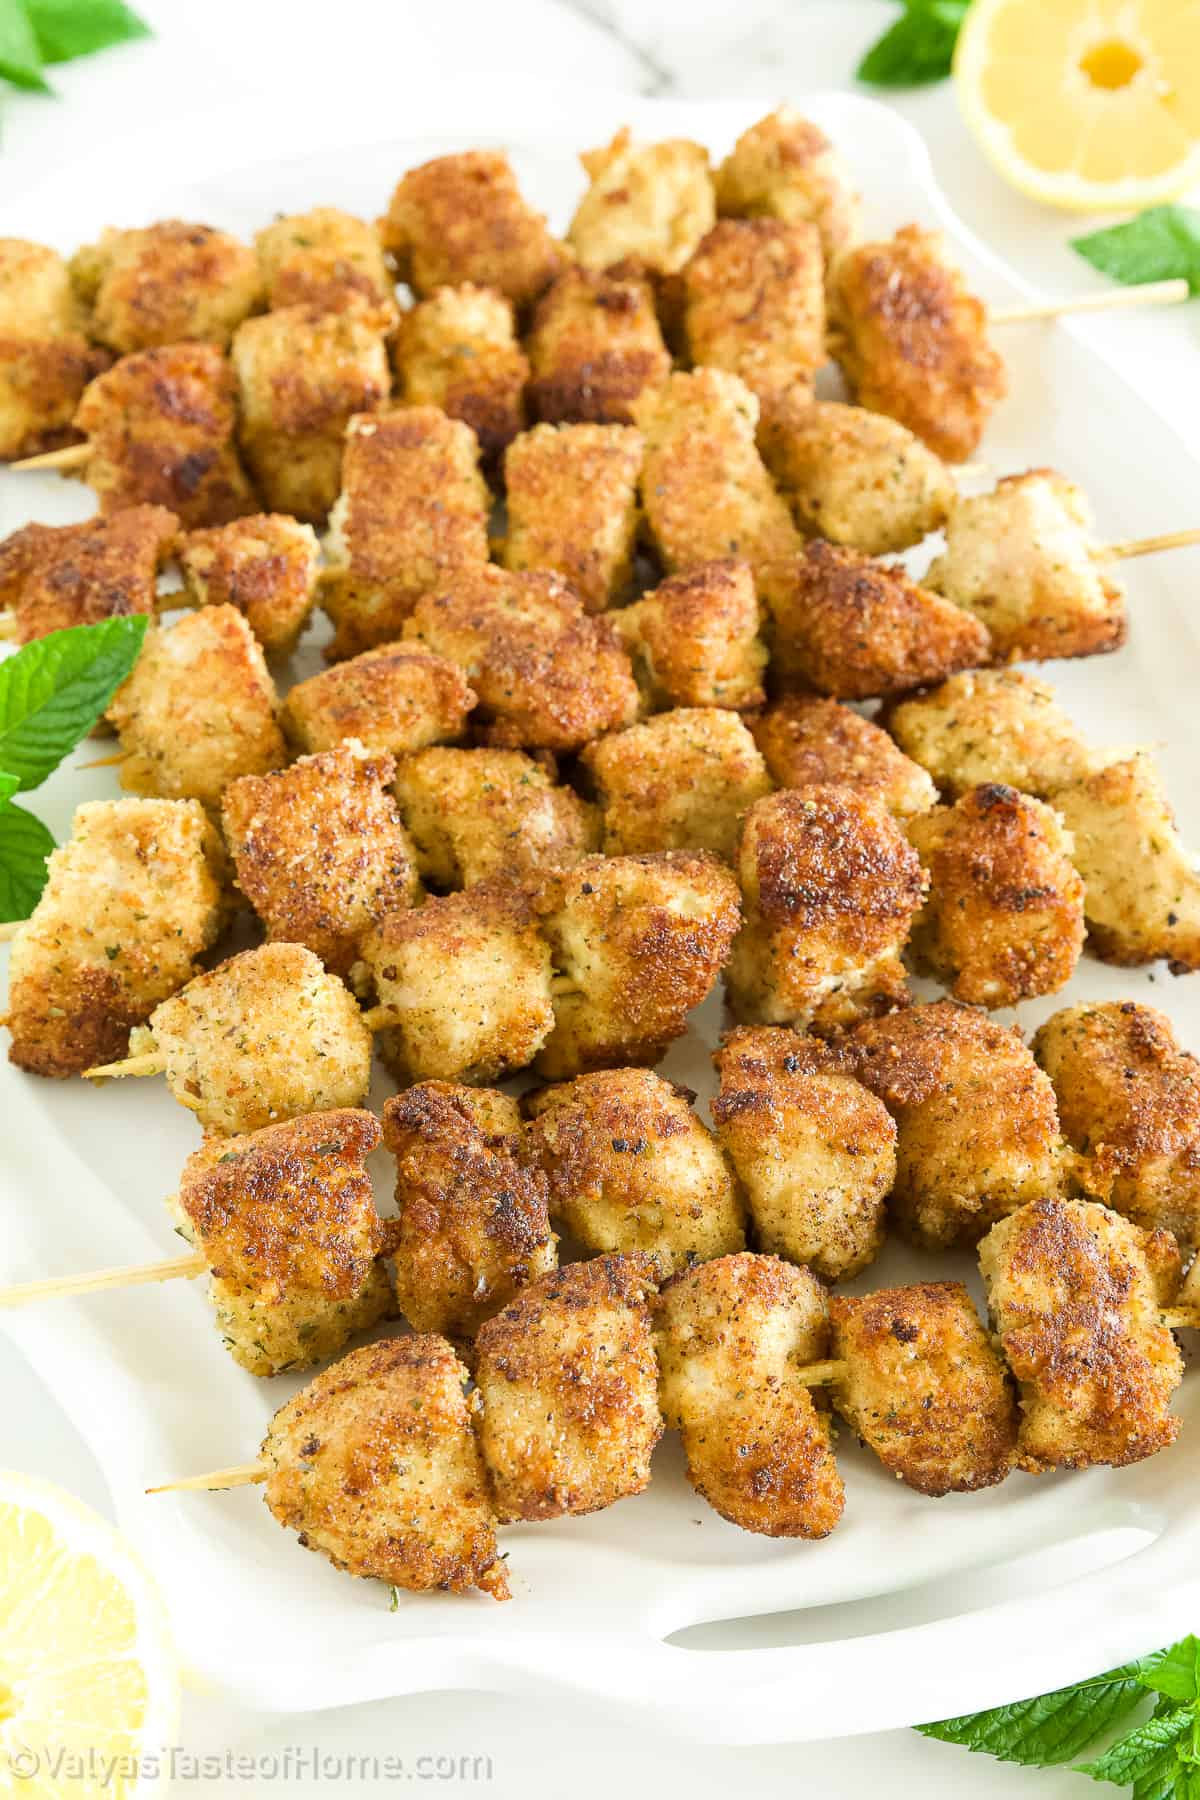 They’re delicious small chunks of chicken soaked in spices, mayo, and parmesan with a little zest of lemon juice!